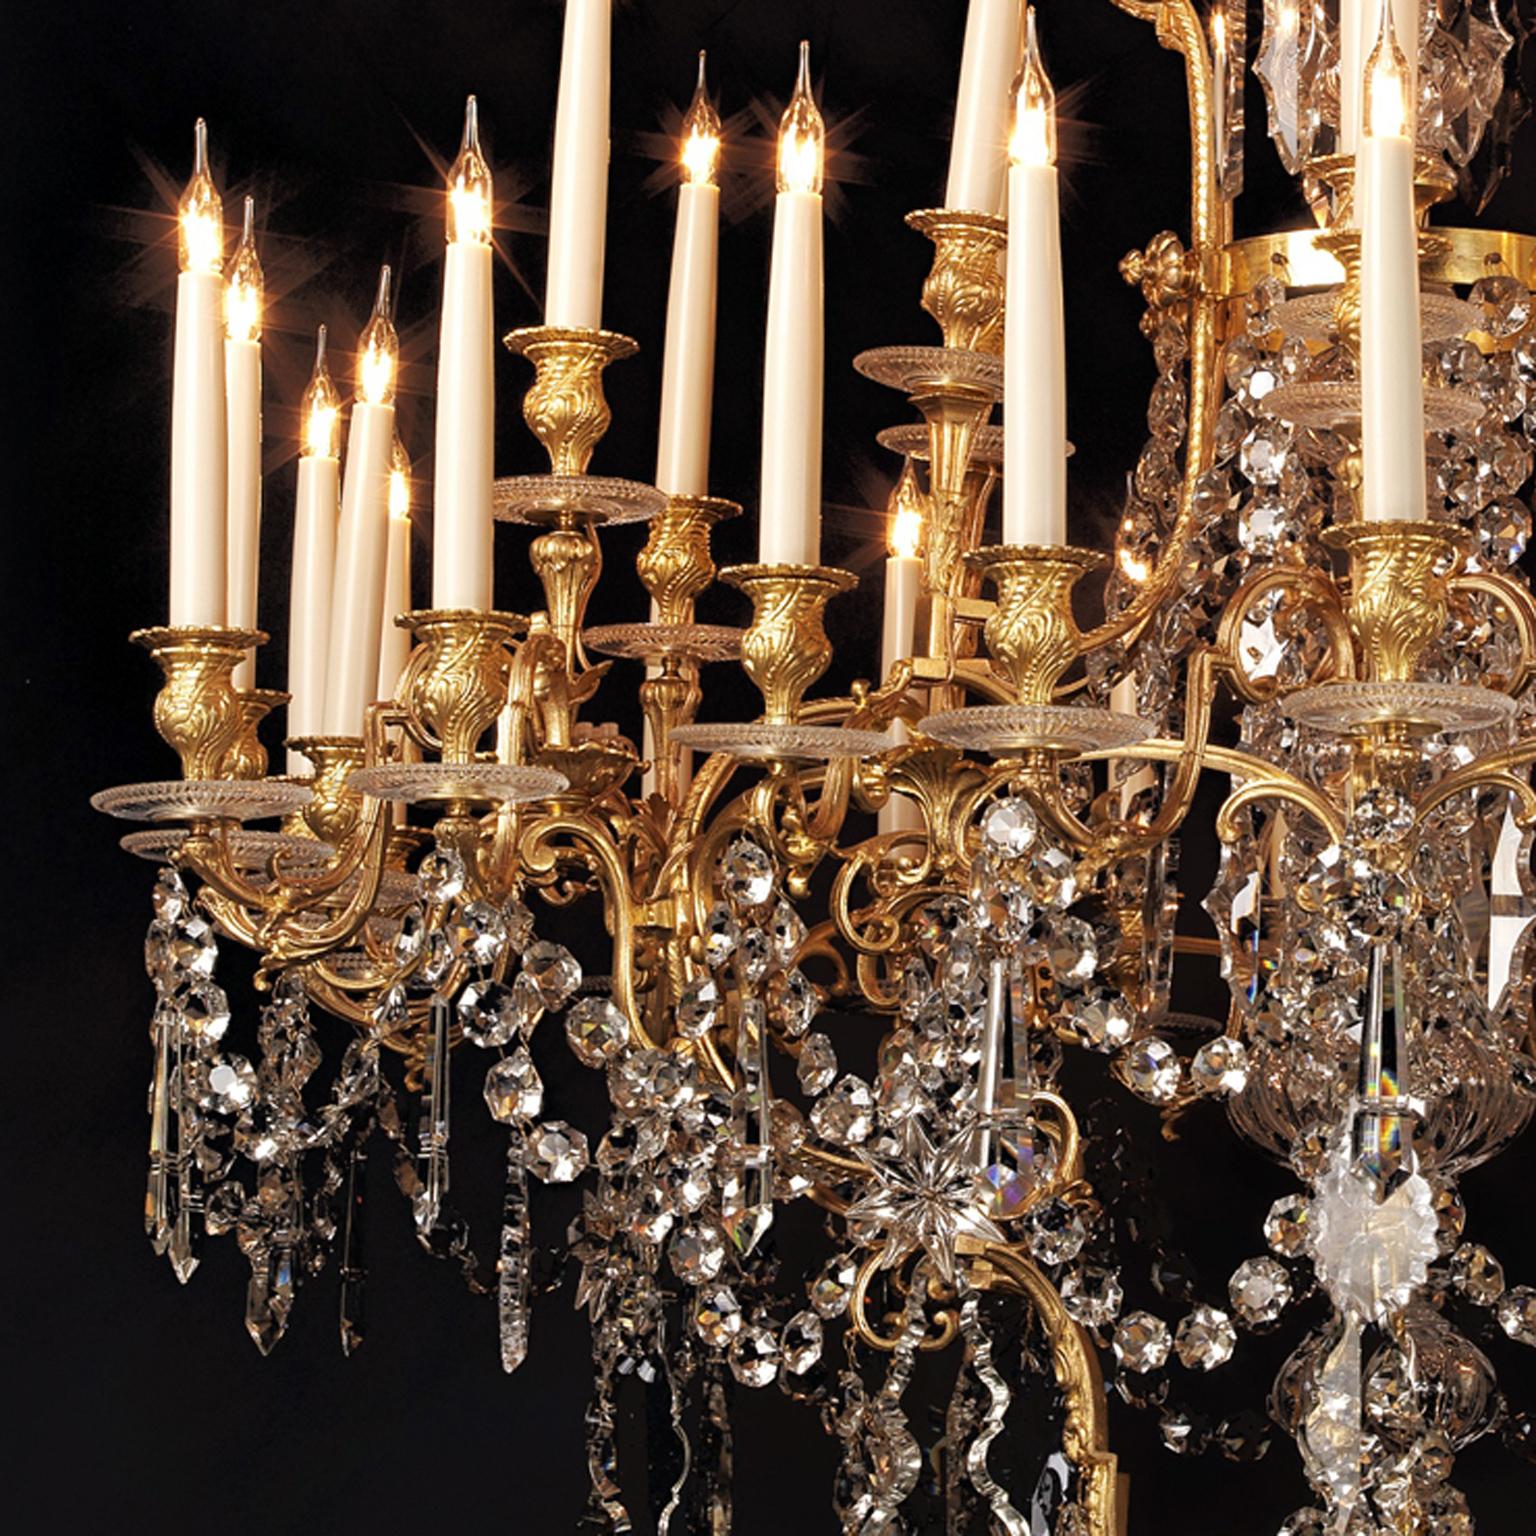 French Napoléon III Gilt Bronze and Cut-Glass Thirty-Six Light Chandelier, circa 1870 For Sale